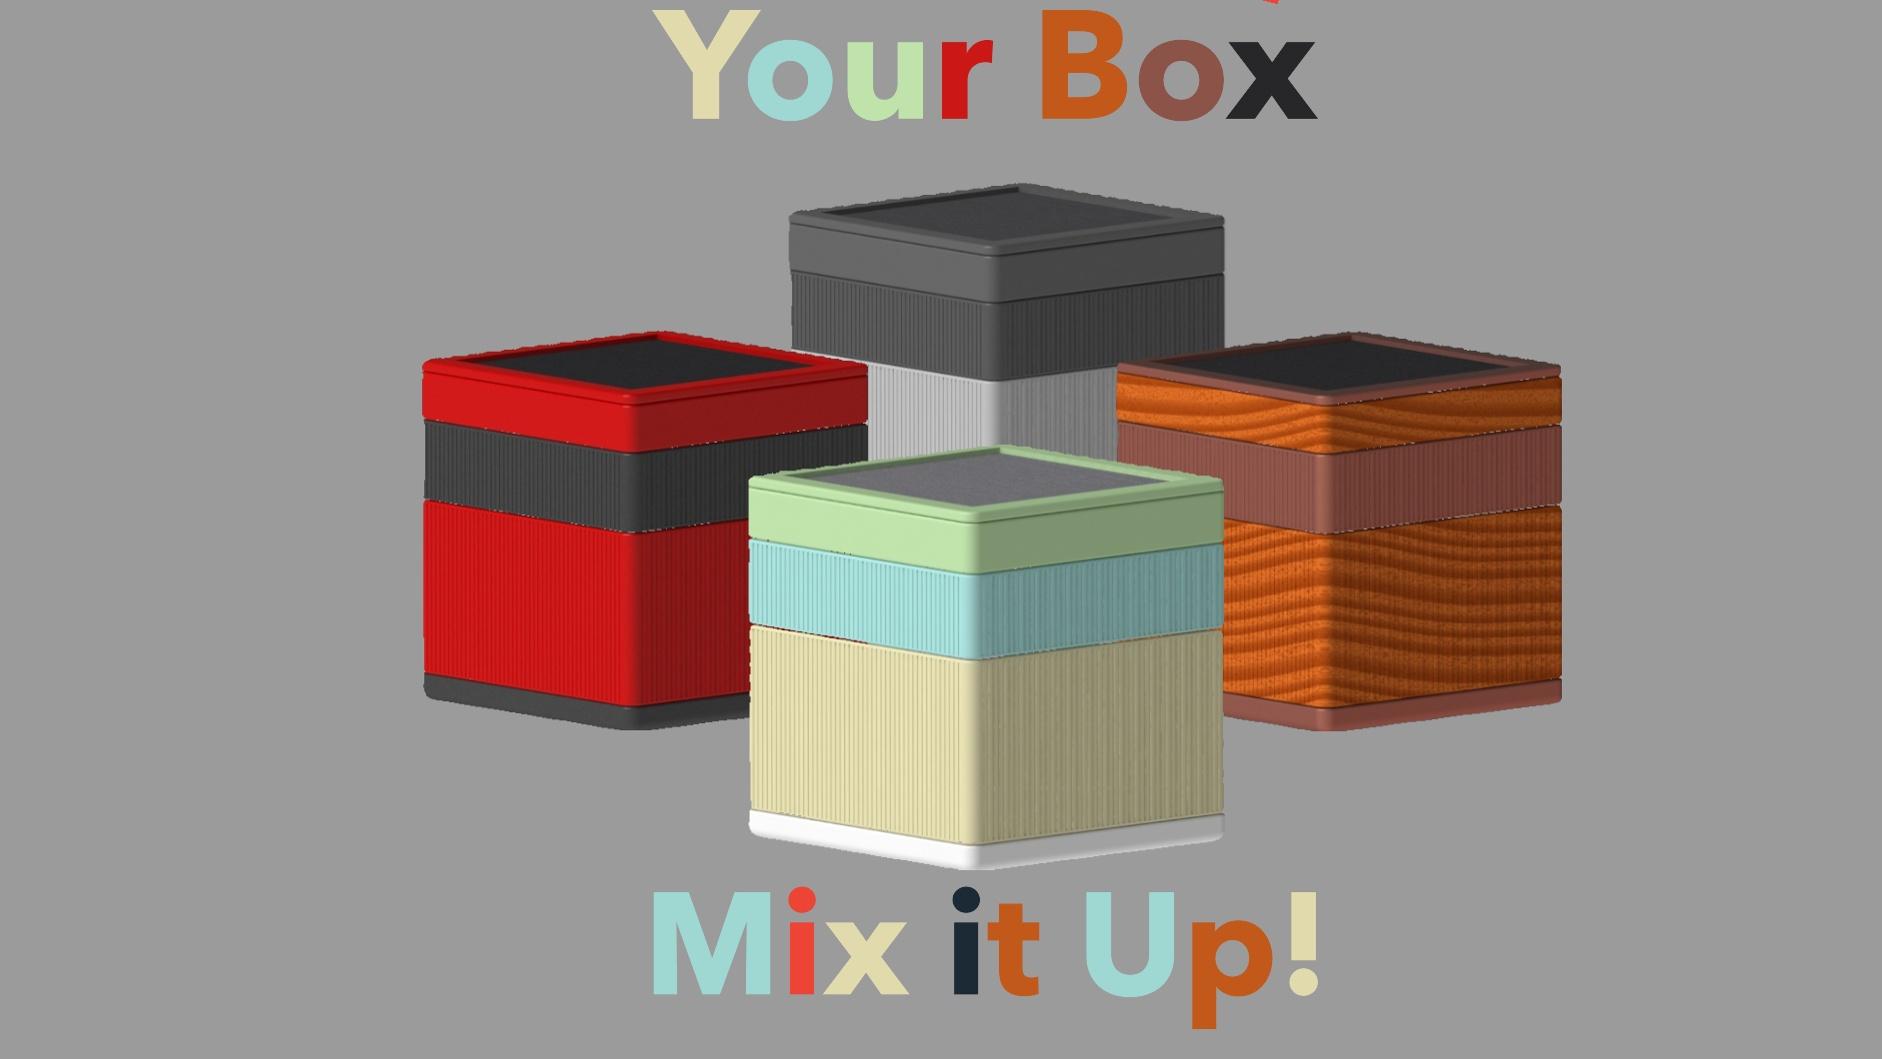 The Box ~ Customizable Organizer  - It's Your Box! Mix it Up! - 3d model